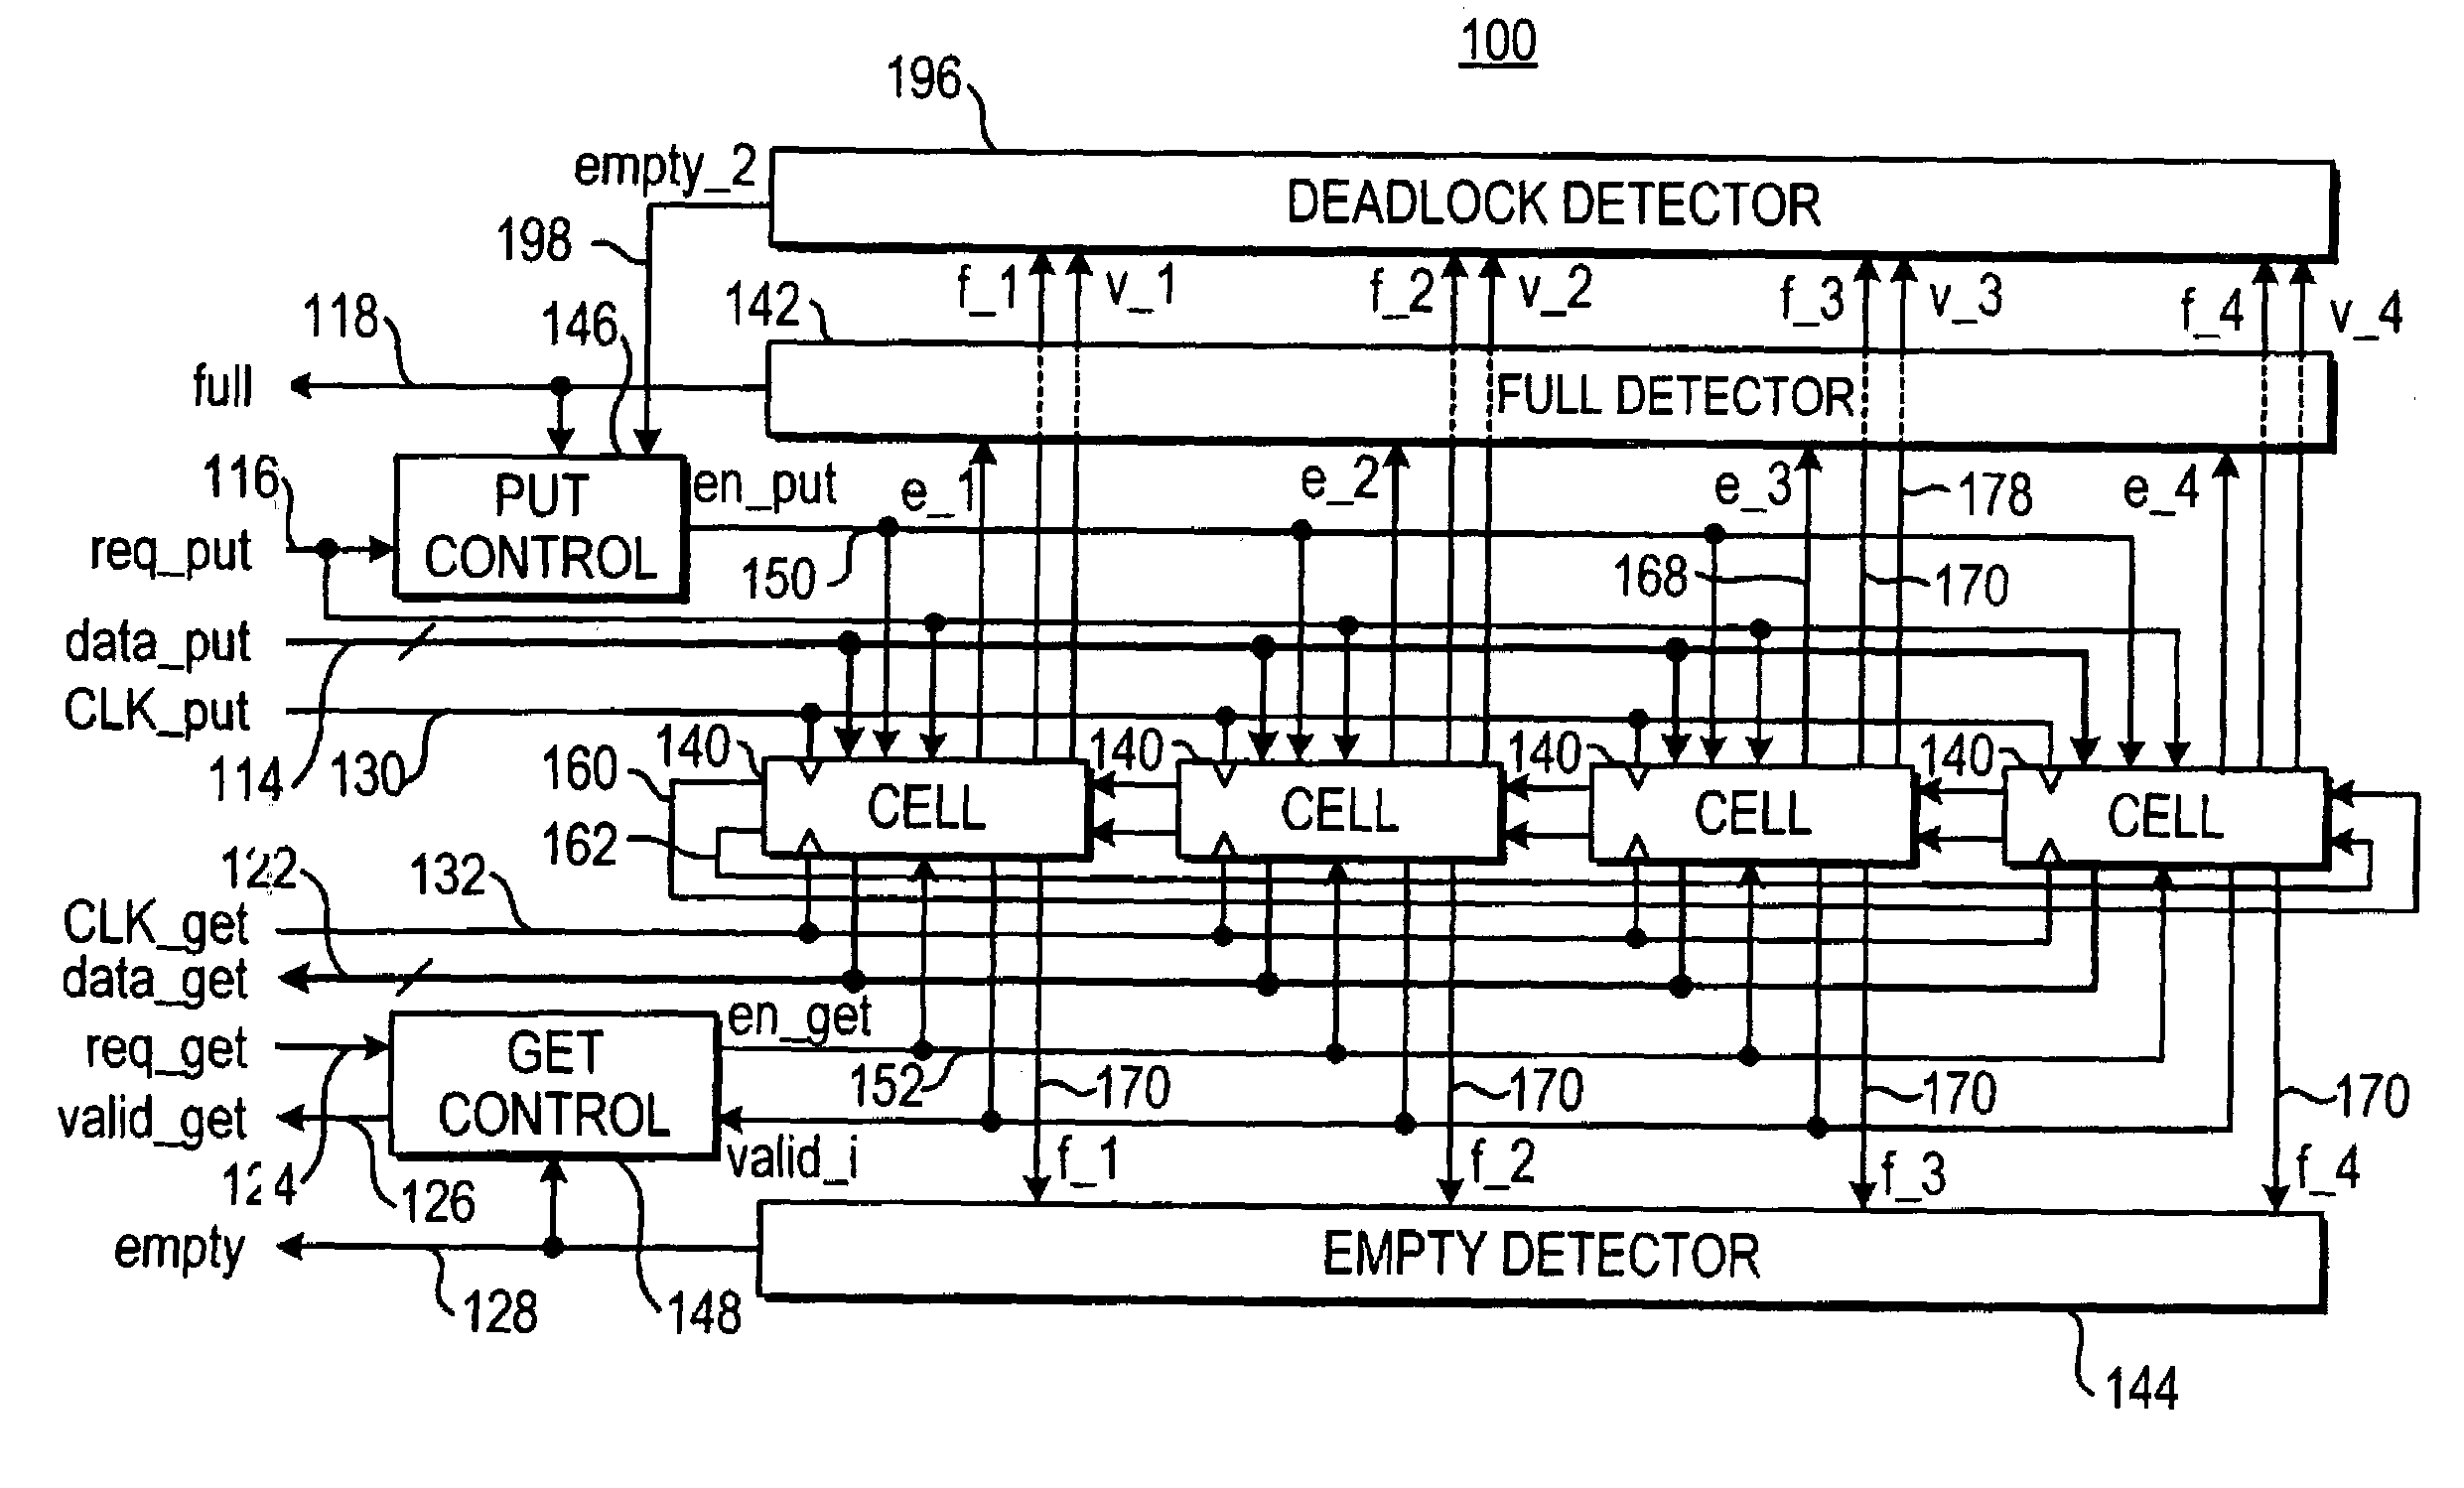 Low latency FIFO circuit for mixed clock systems